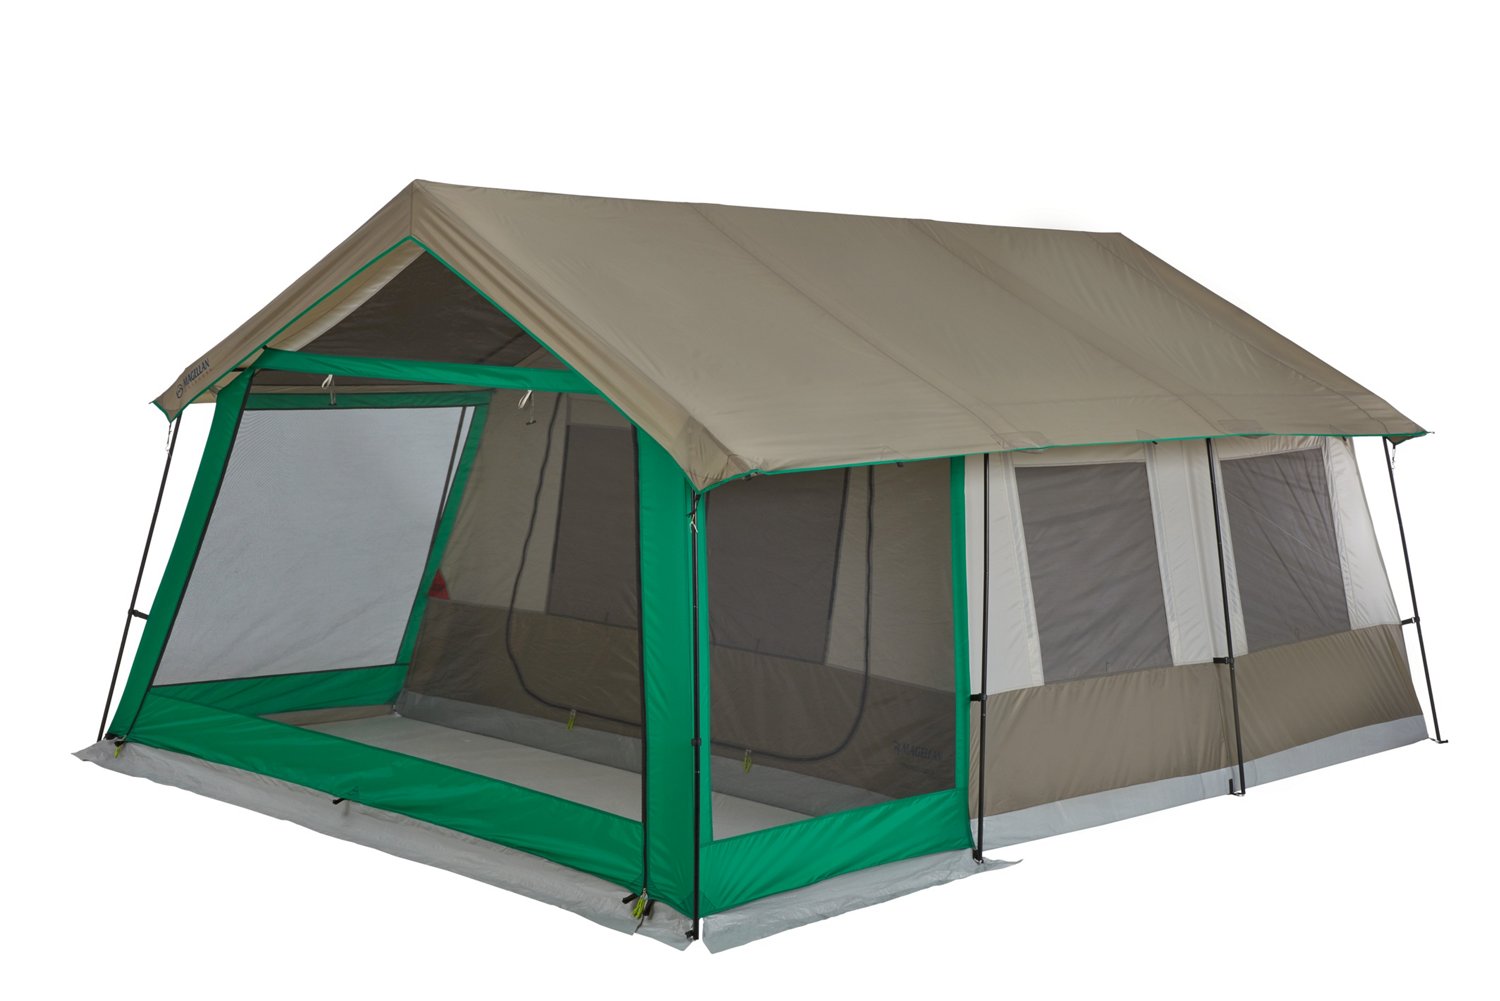 Magellan Outdoors Lakewood Lodge 10-Person Cabin Tent | Academy